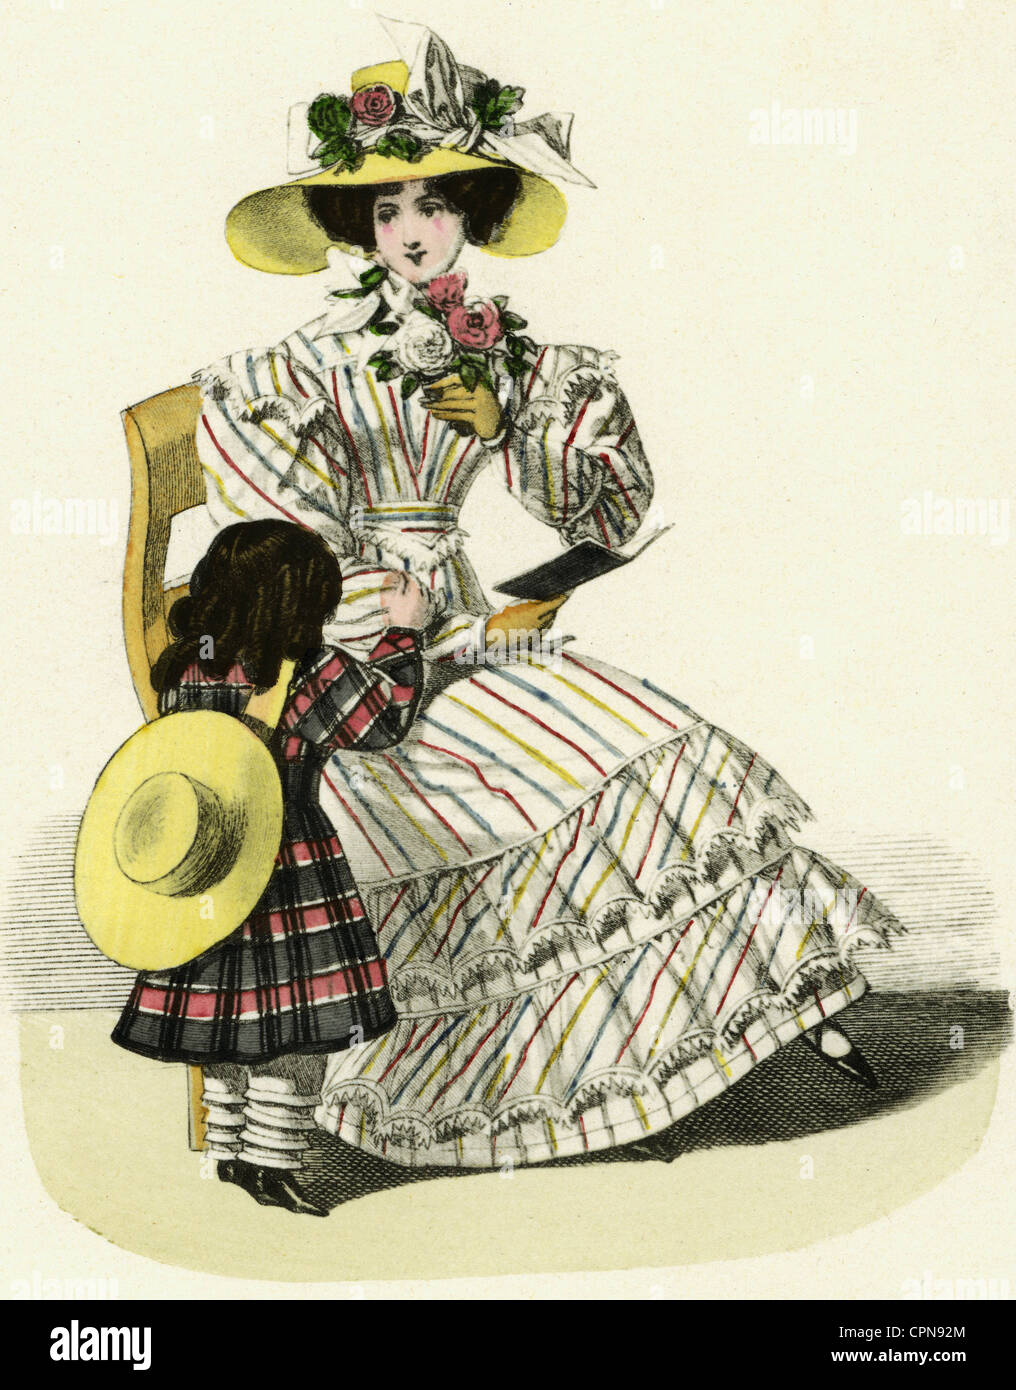 fashion, ladies' fashion, Biedermeier, woman with child, lithograph in Viennese magazine from July 1827, Austria, 1827, mother, mothers, daughter, daughters, child, children, kid, kids, chair, chairs, sitting, sit, hat, hats, with flower arrangements, wide skirt, striped, stripe, stripes, quilling, quillings, narrow-waisted, wasp waist, wasp waists, rose, roses, polite society, beauty, fashion illustration, 19th century, summer fashion, summer dress, summer dresses, woman, women, historic, historical, people, female, Additional-Rights-Clearences-Not Available Stock Photo